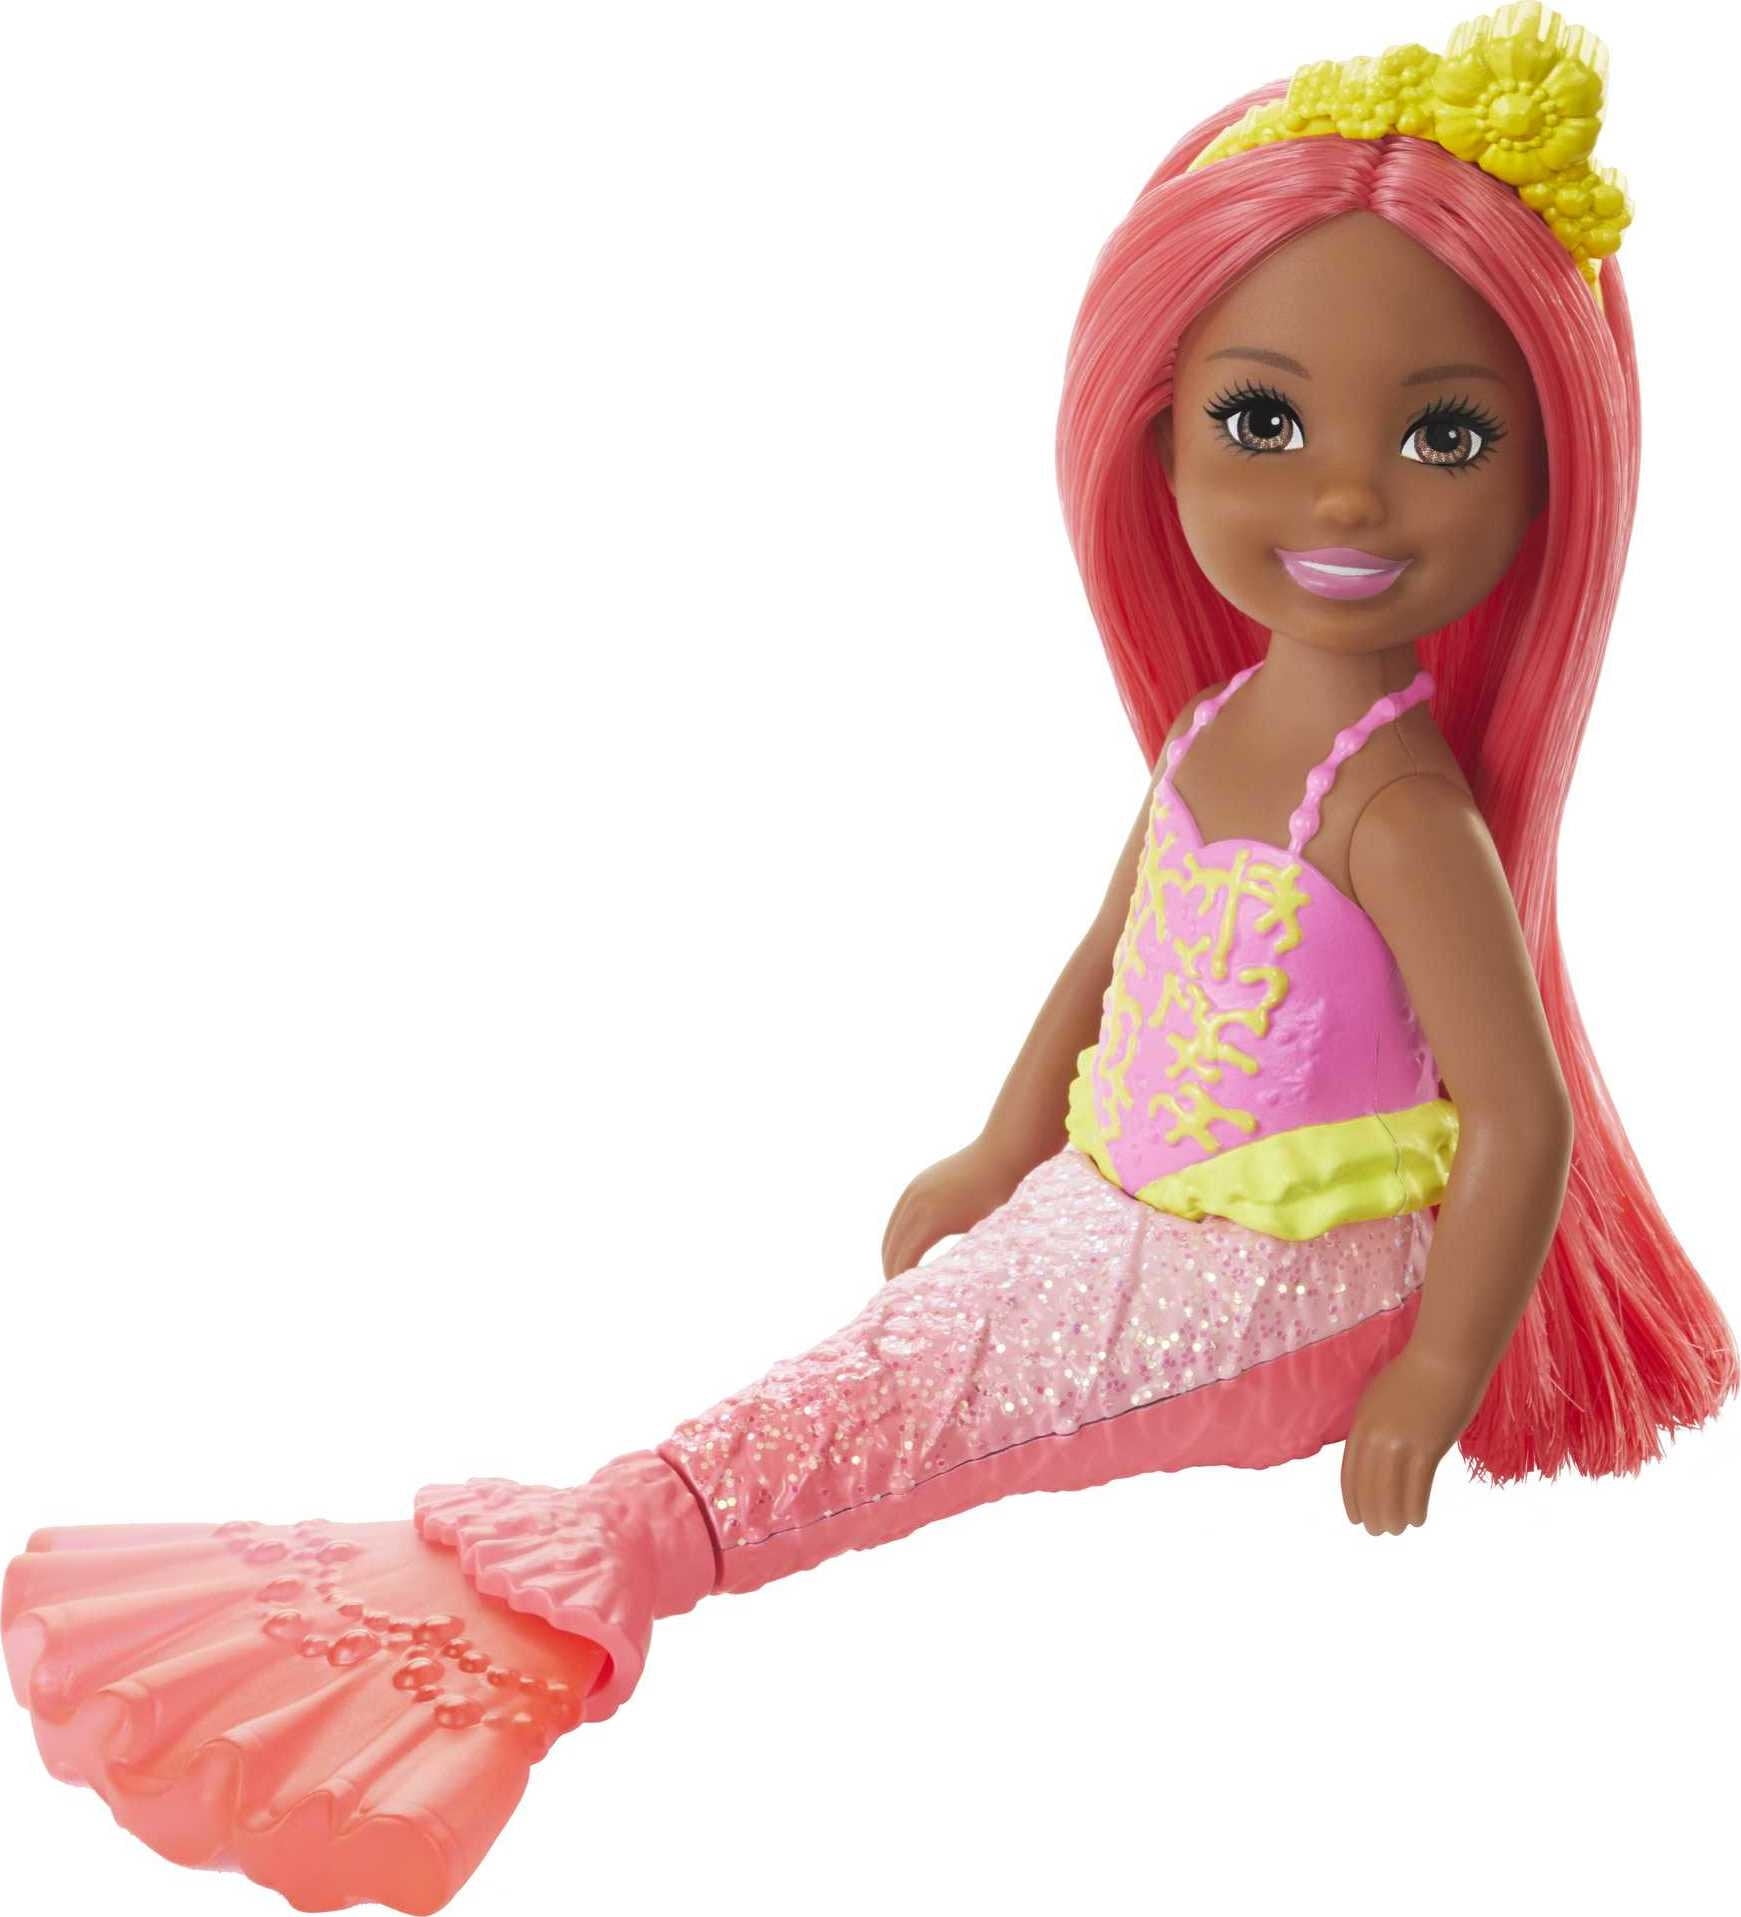 Barbie Dreamtopia Chelsea Mermaid Small Doll & Accessory, Coral-Colored Hair & Tail (6.5-inch)